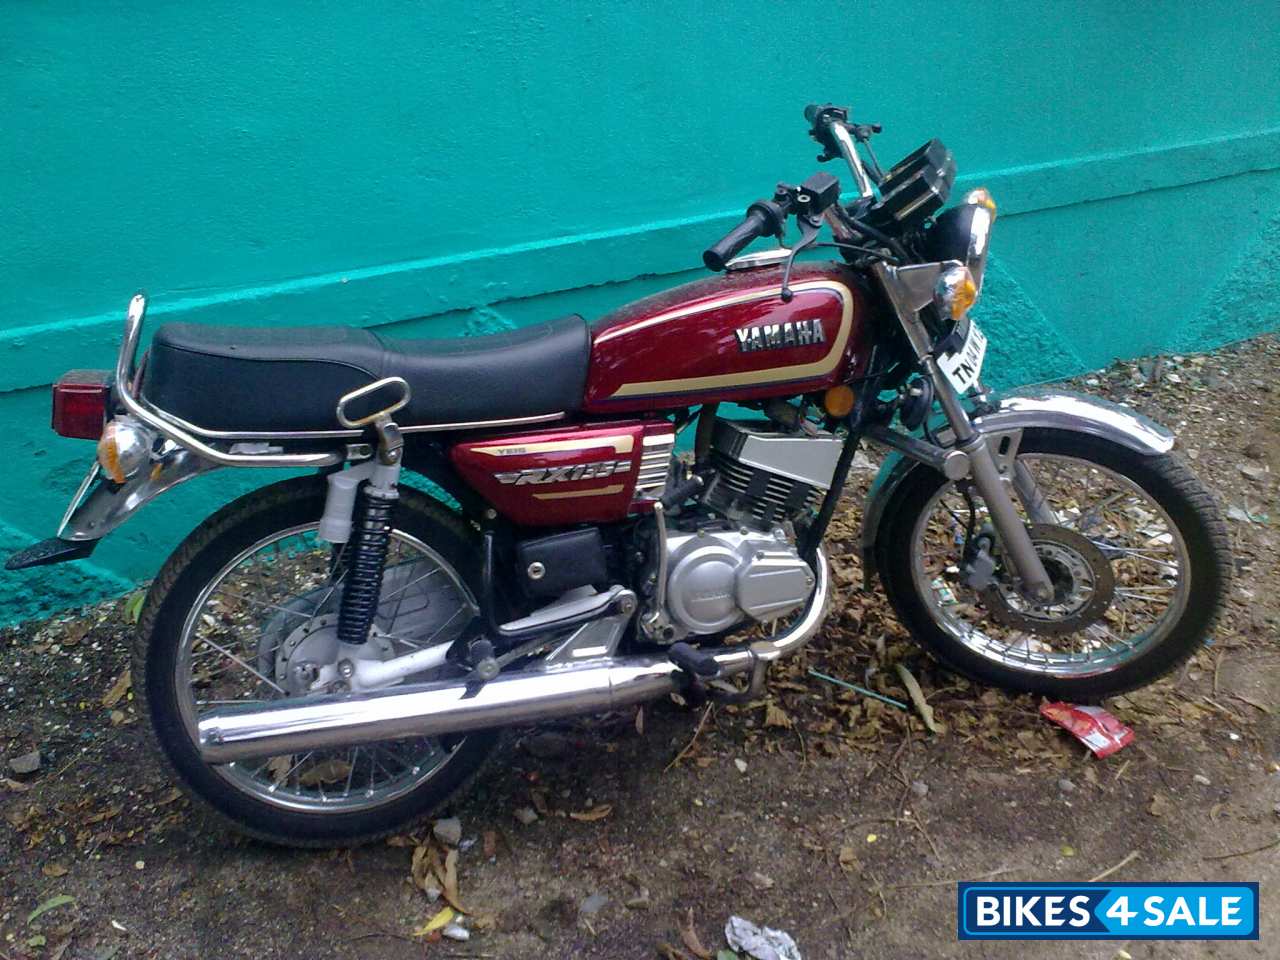 Used Yamaha RX 135 for sale in Chennai. ID 30766